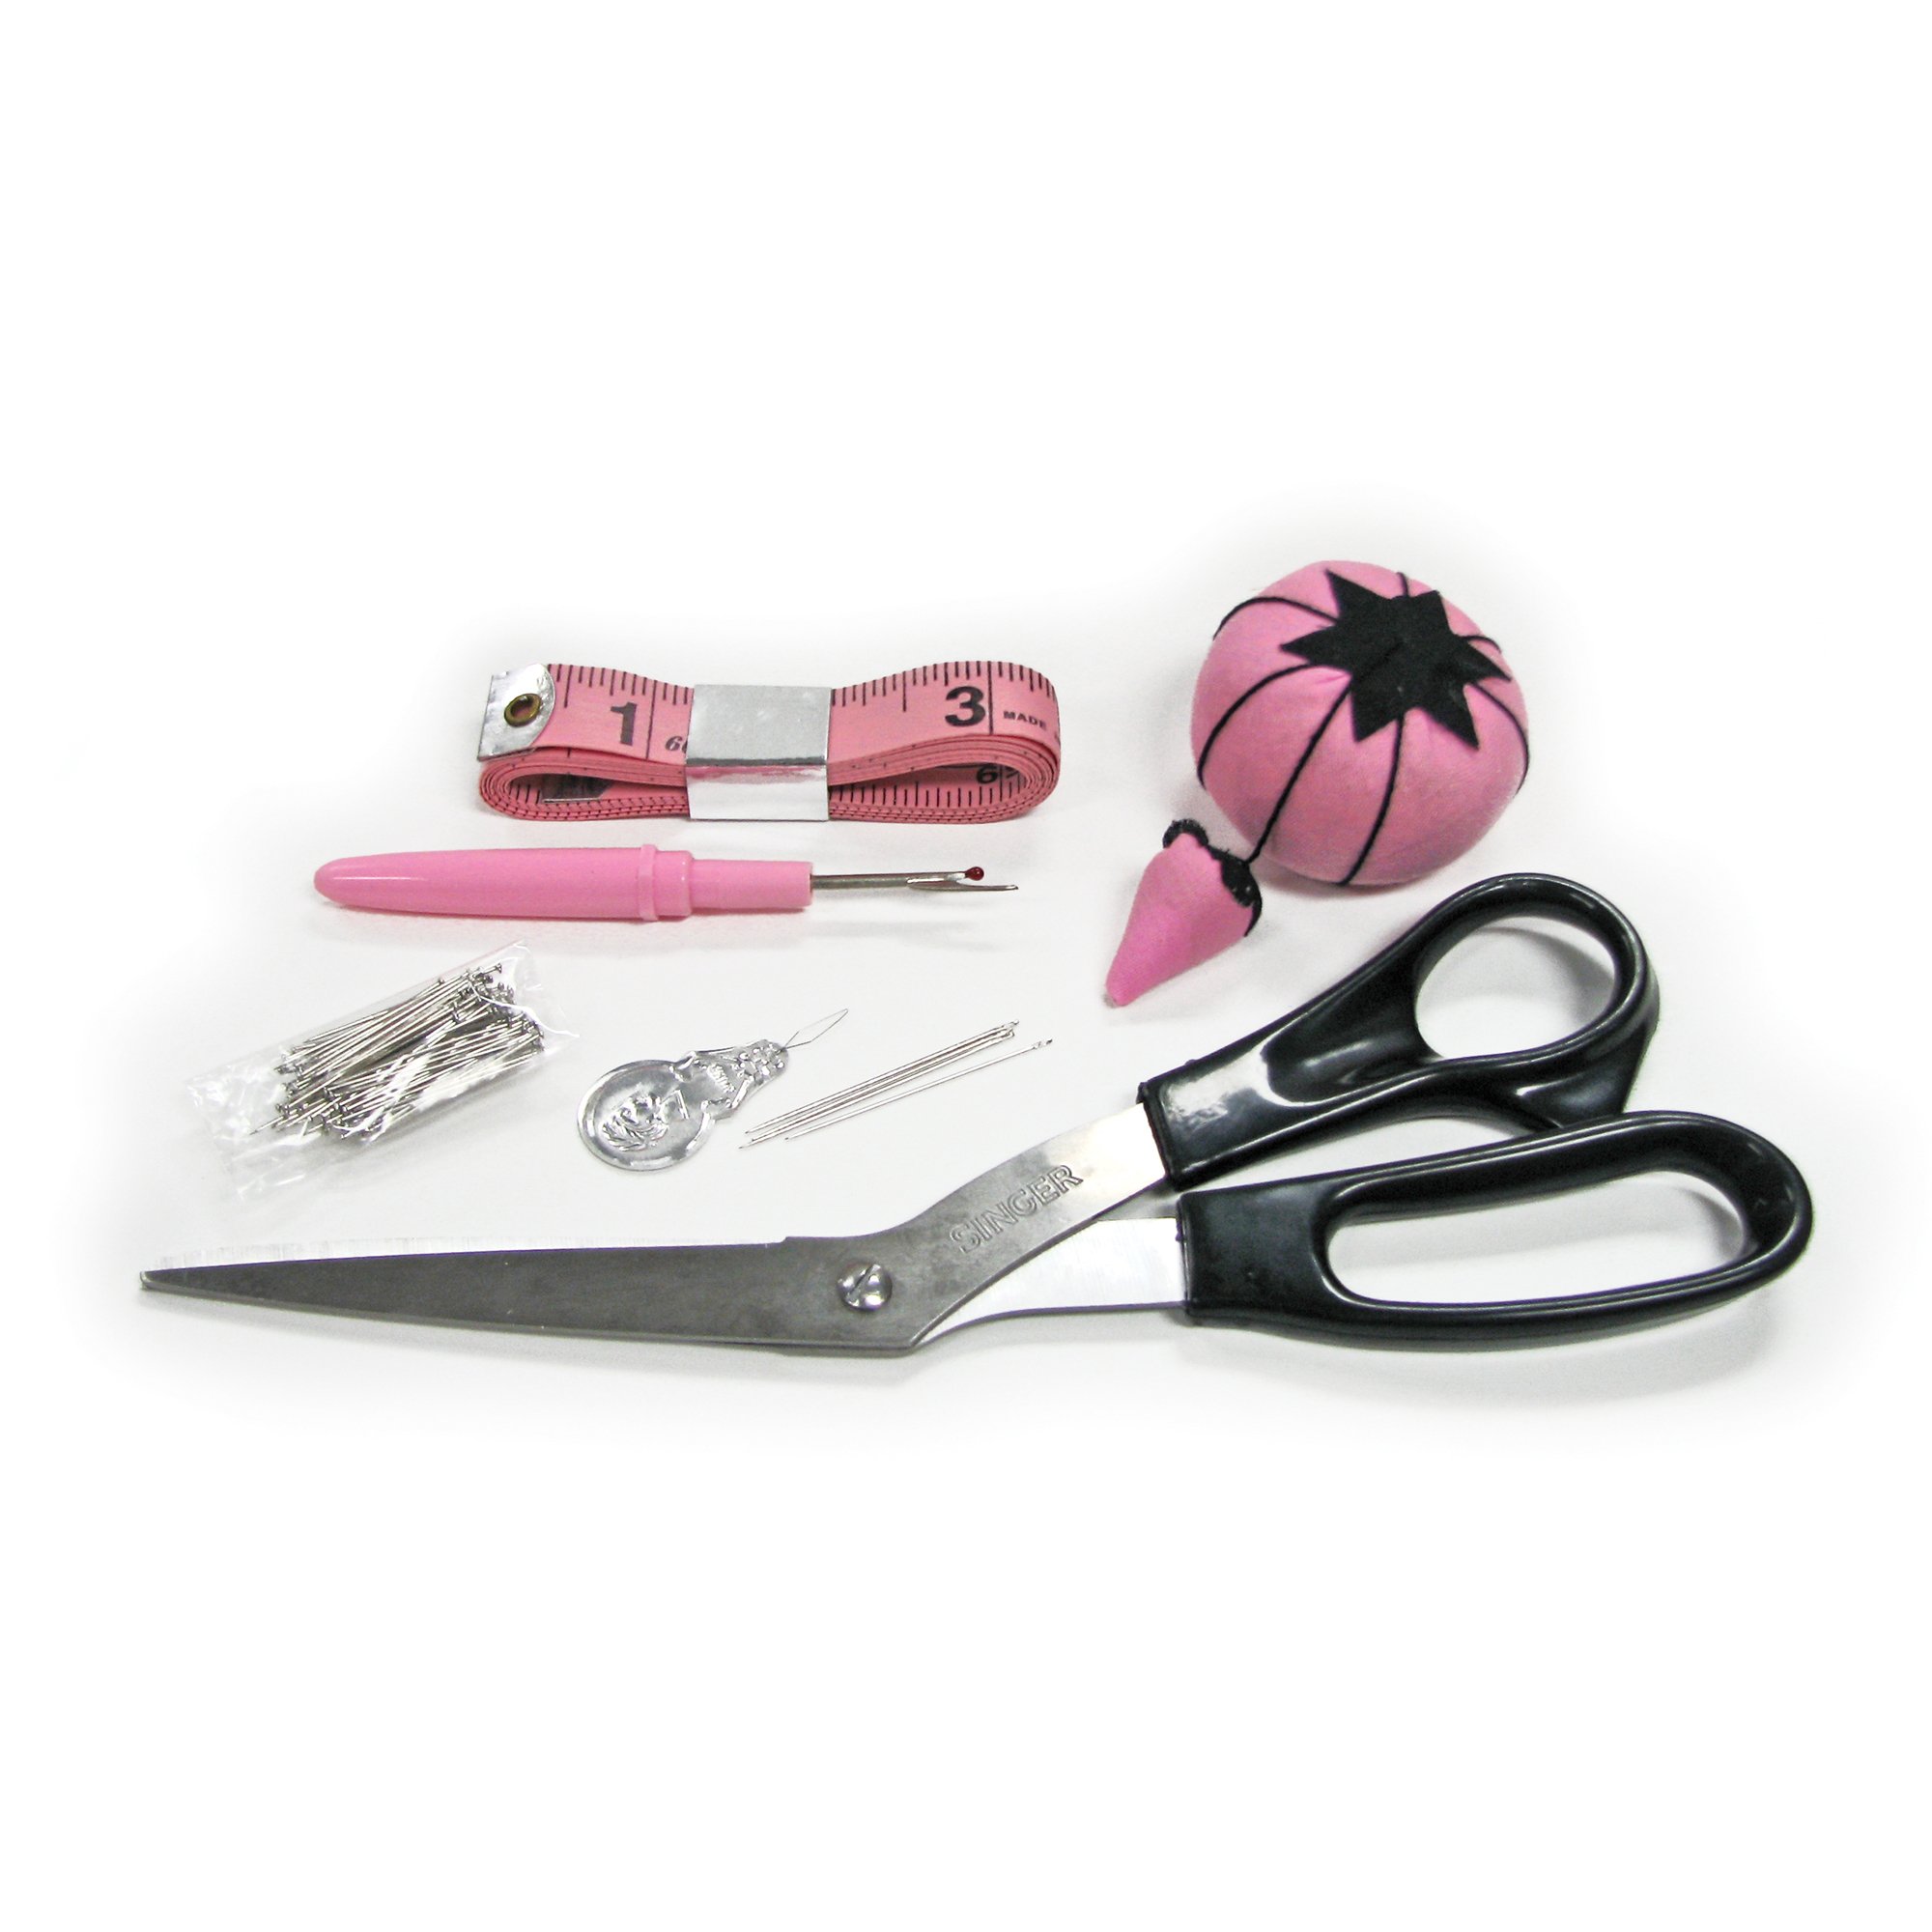 SINGER 60207 Sewer's Companion Sewing Kit